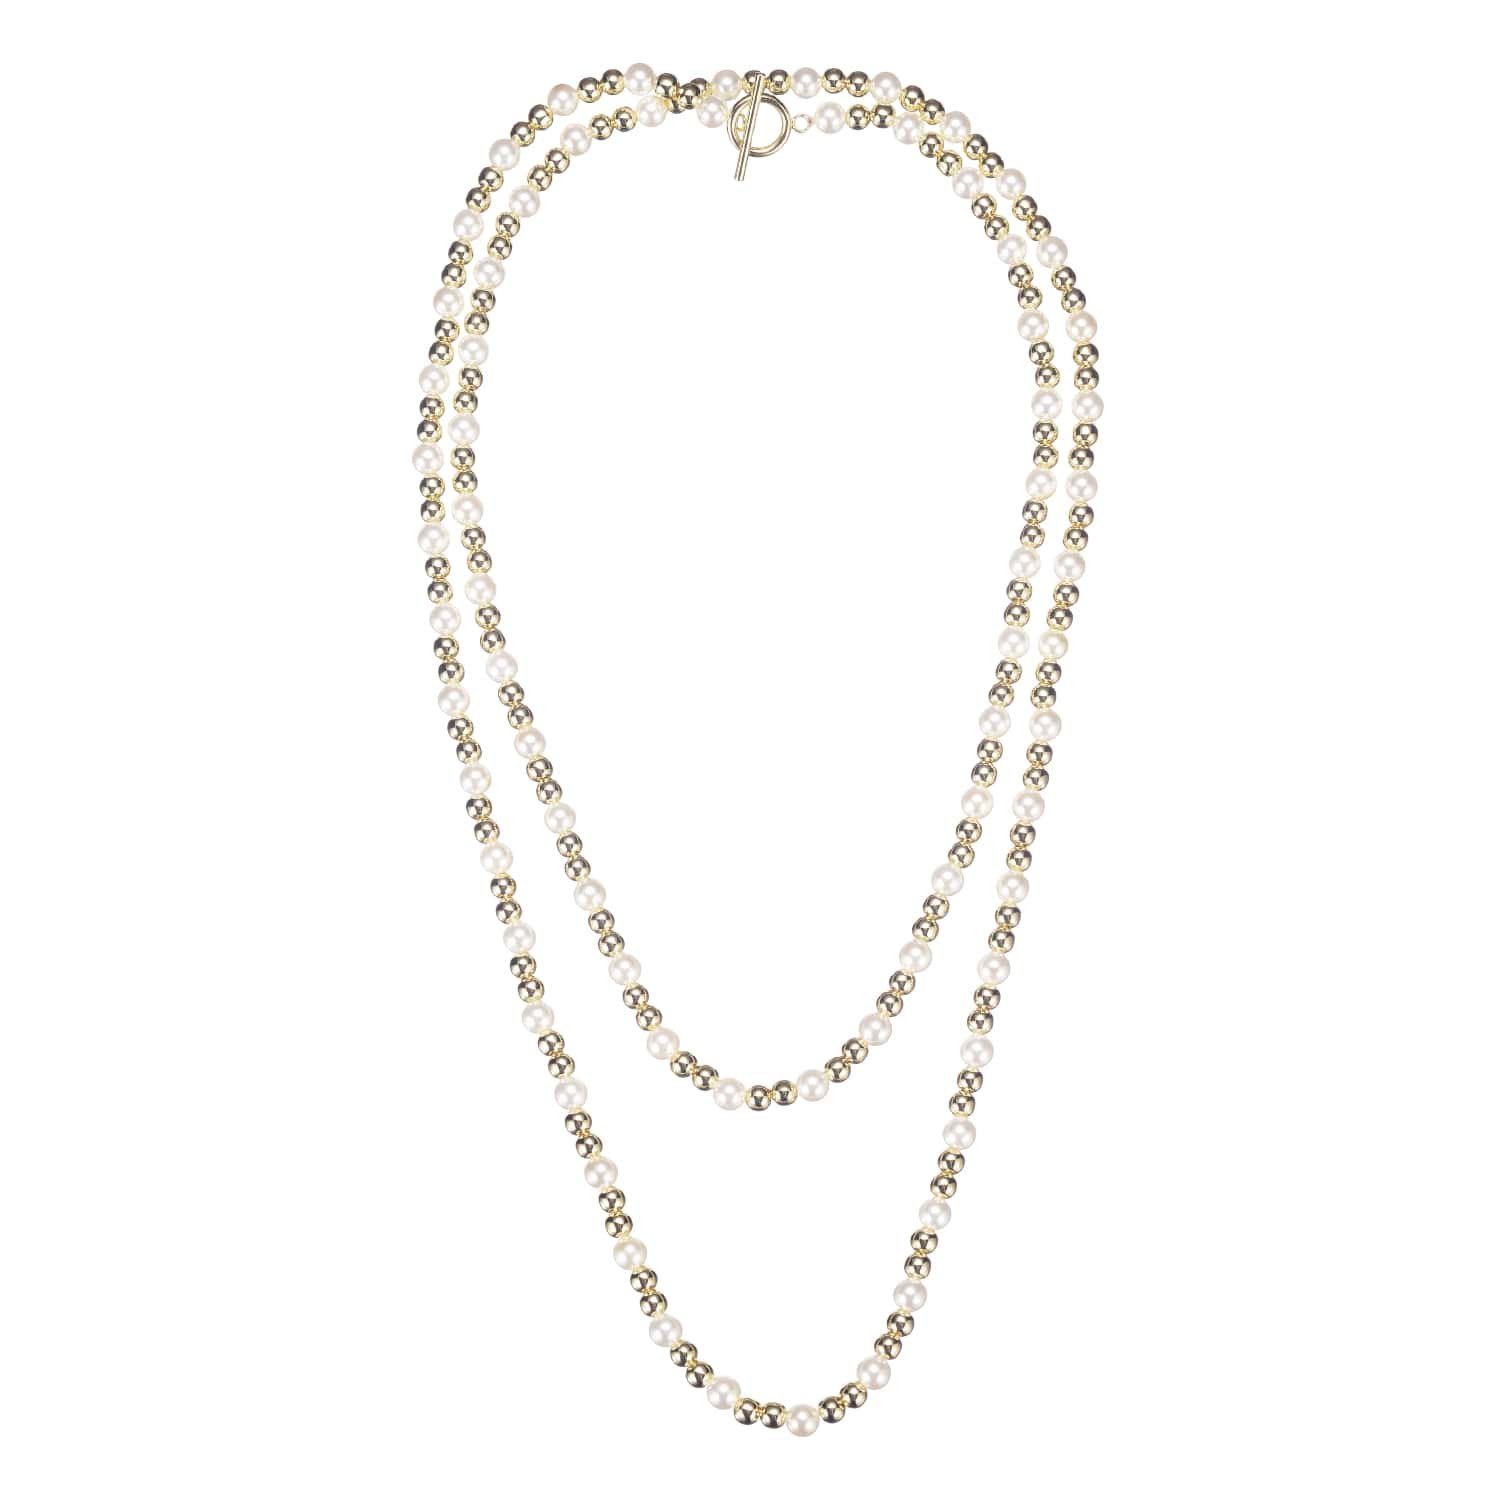 Natalie Wood - Adorned Pearl Necklace-120 Jewelry & Hair-Natalie Wood-July & June Women's Fashion Boutique Located in San Antonio, Texas